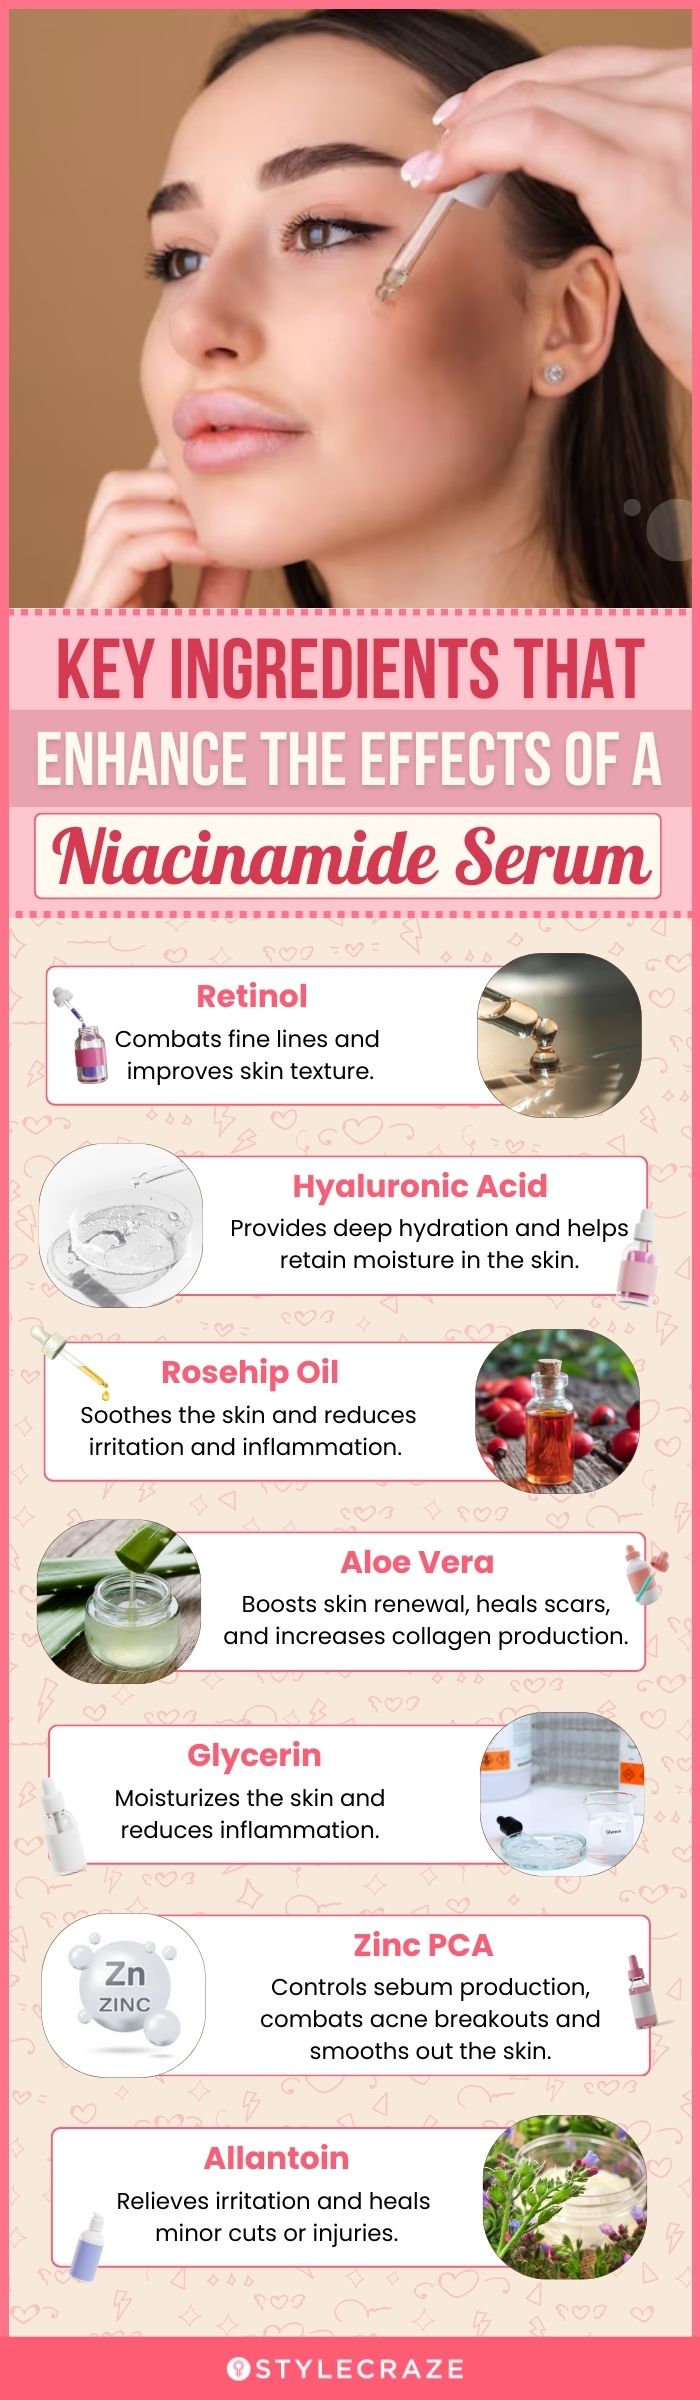 Key Ingredients That Enhance The Effects Of A Niacinamide Serum (infographic)